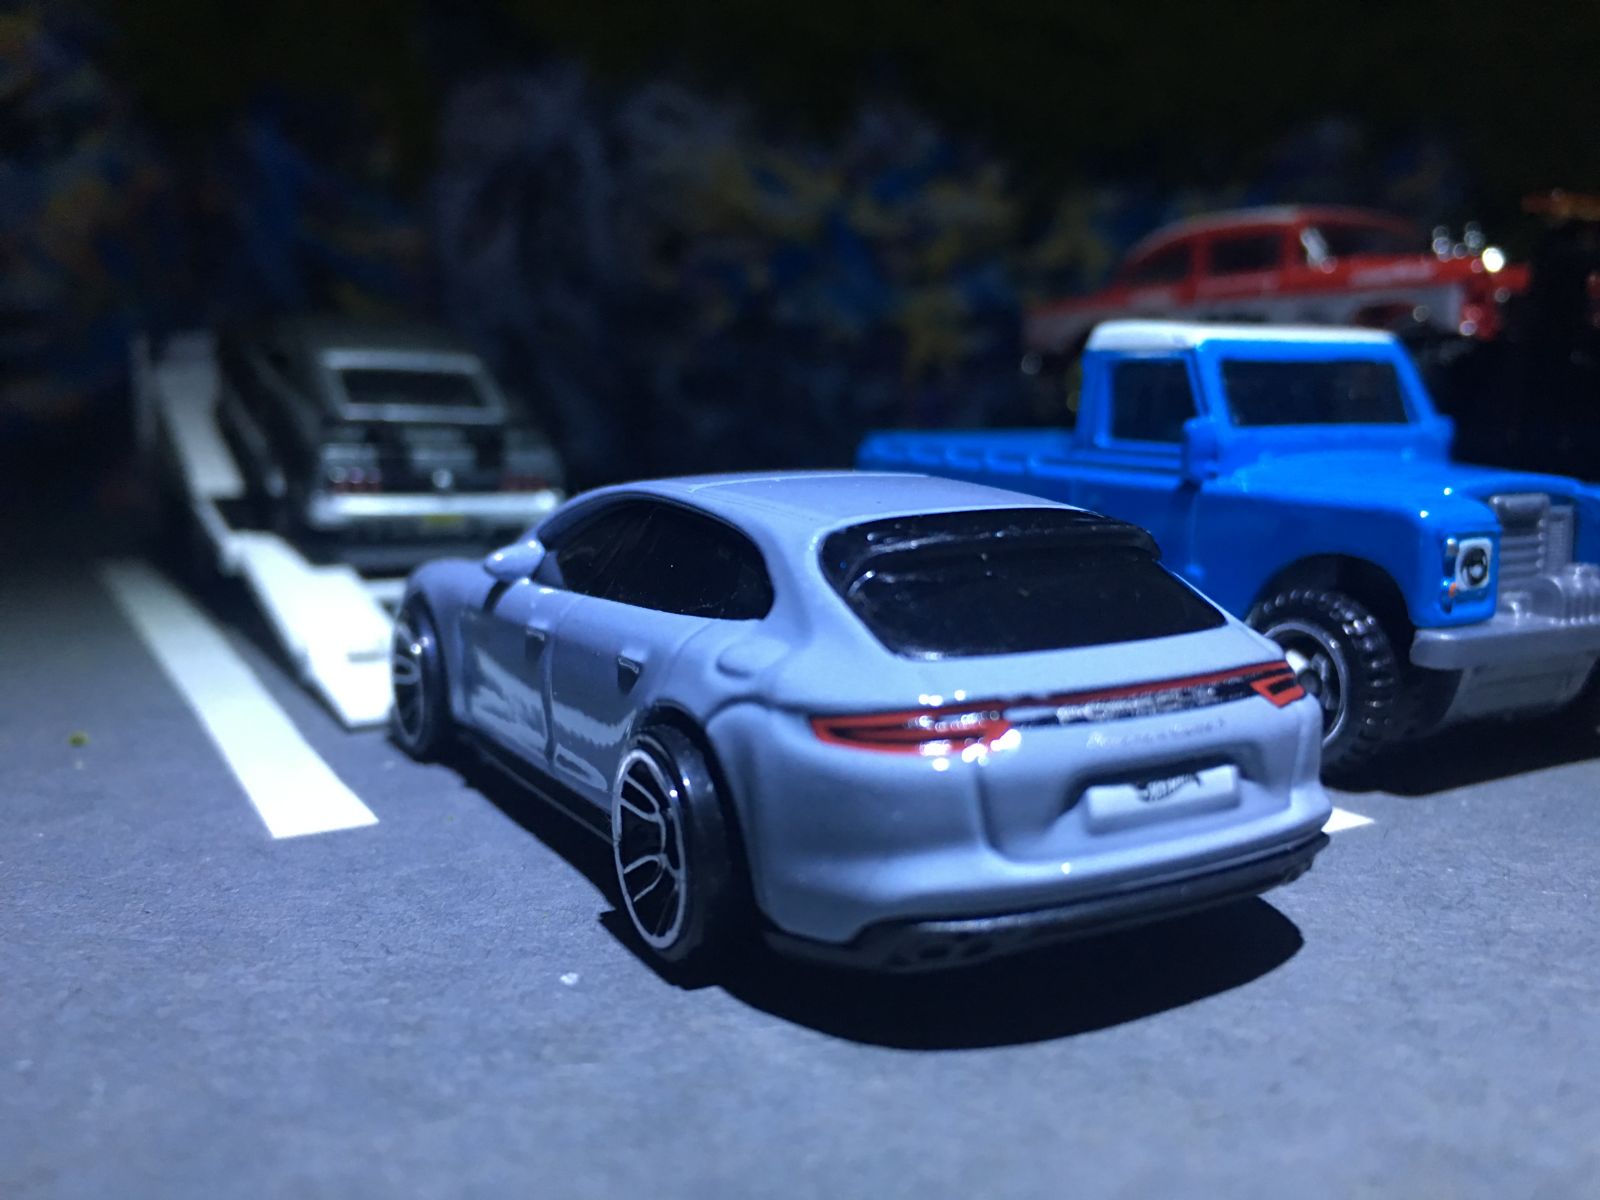 Scored the Panamera, Defender and Gasser at my grocery store, while digging for the Porsche super(: